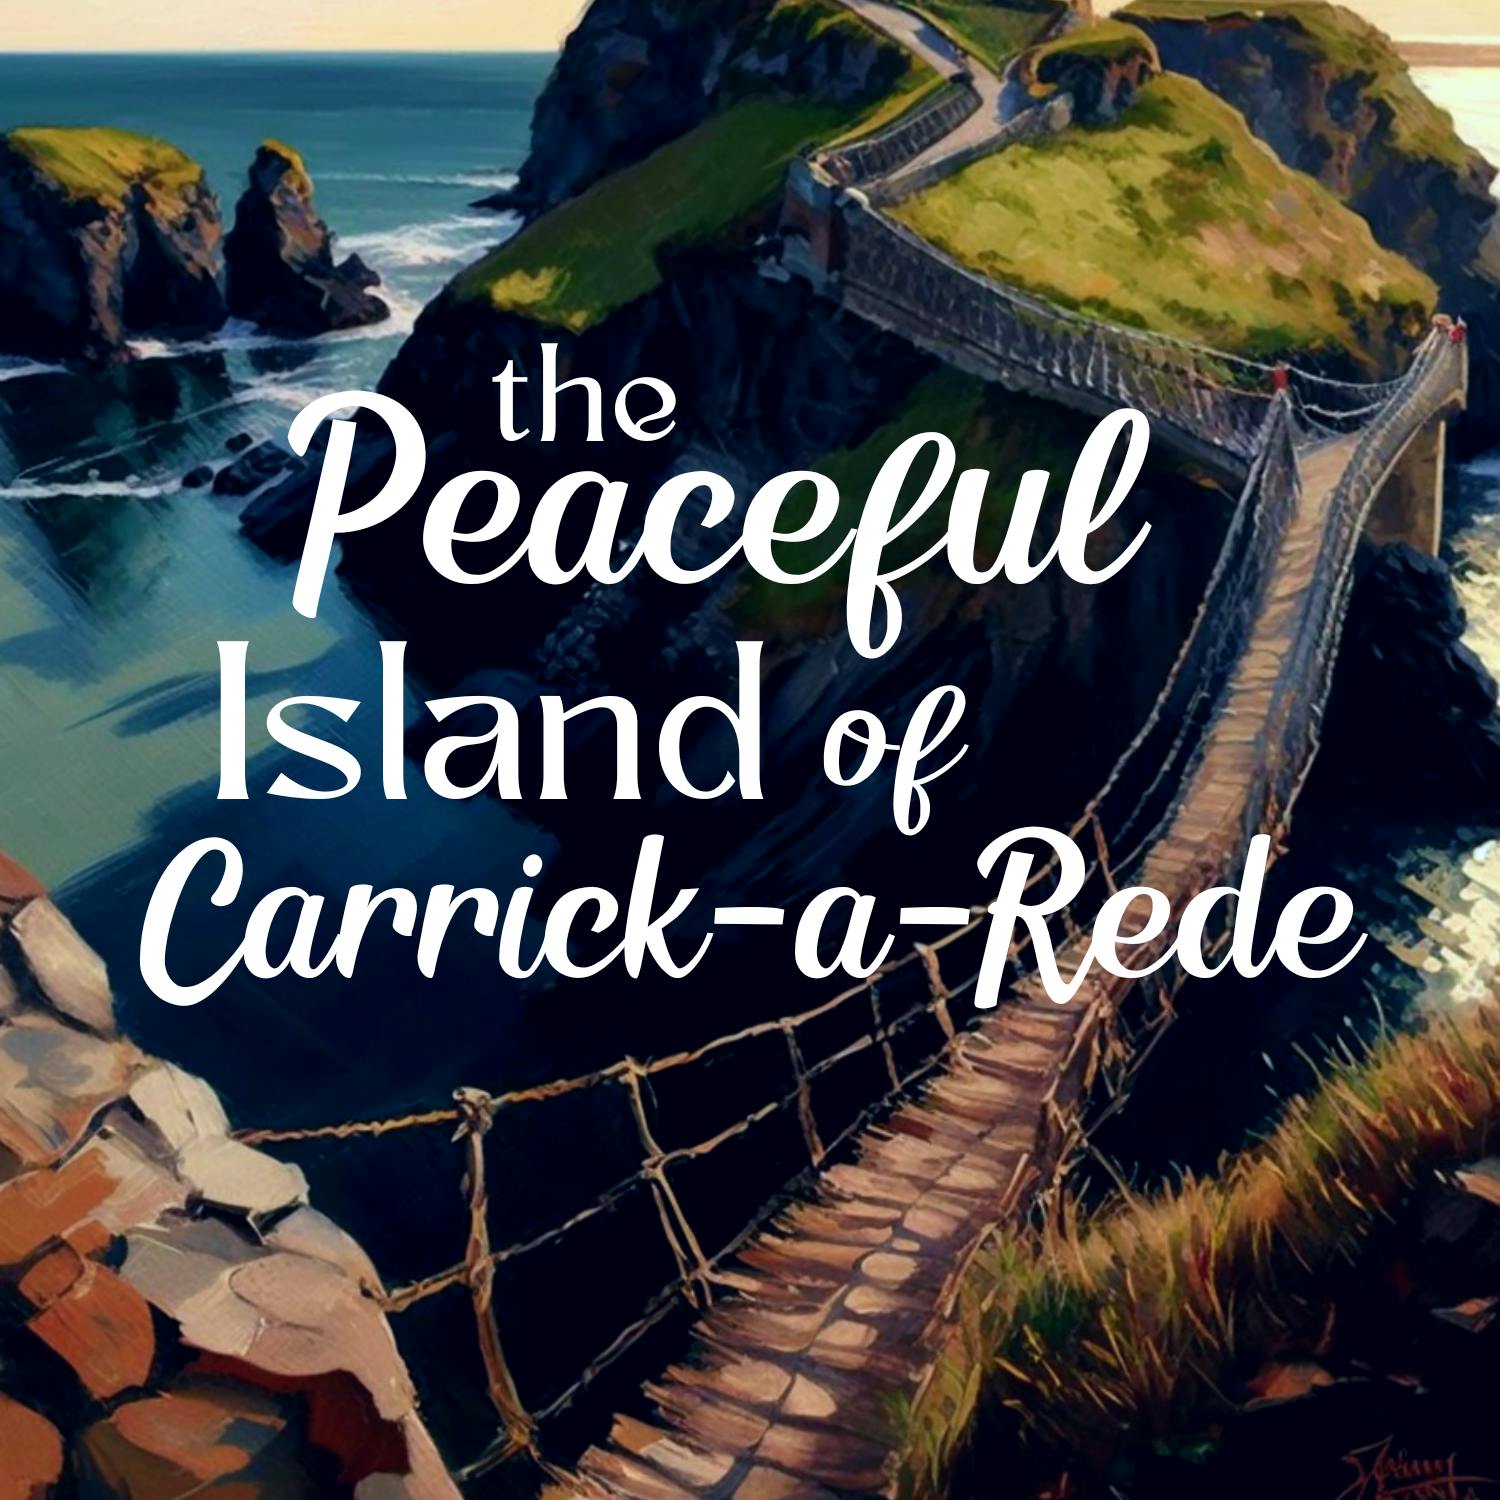 The Peaceful Island of Carrick-a-Rede